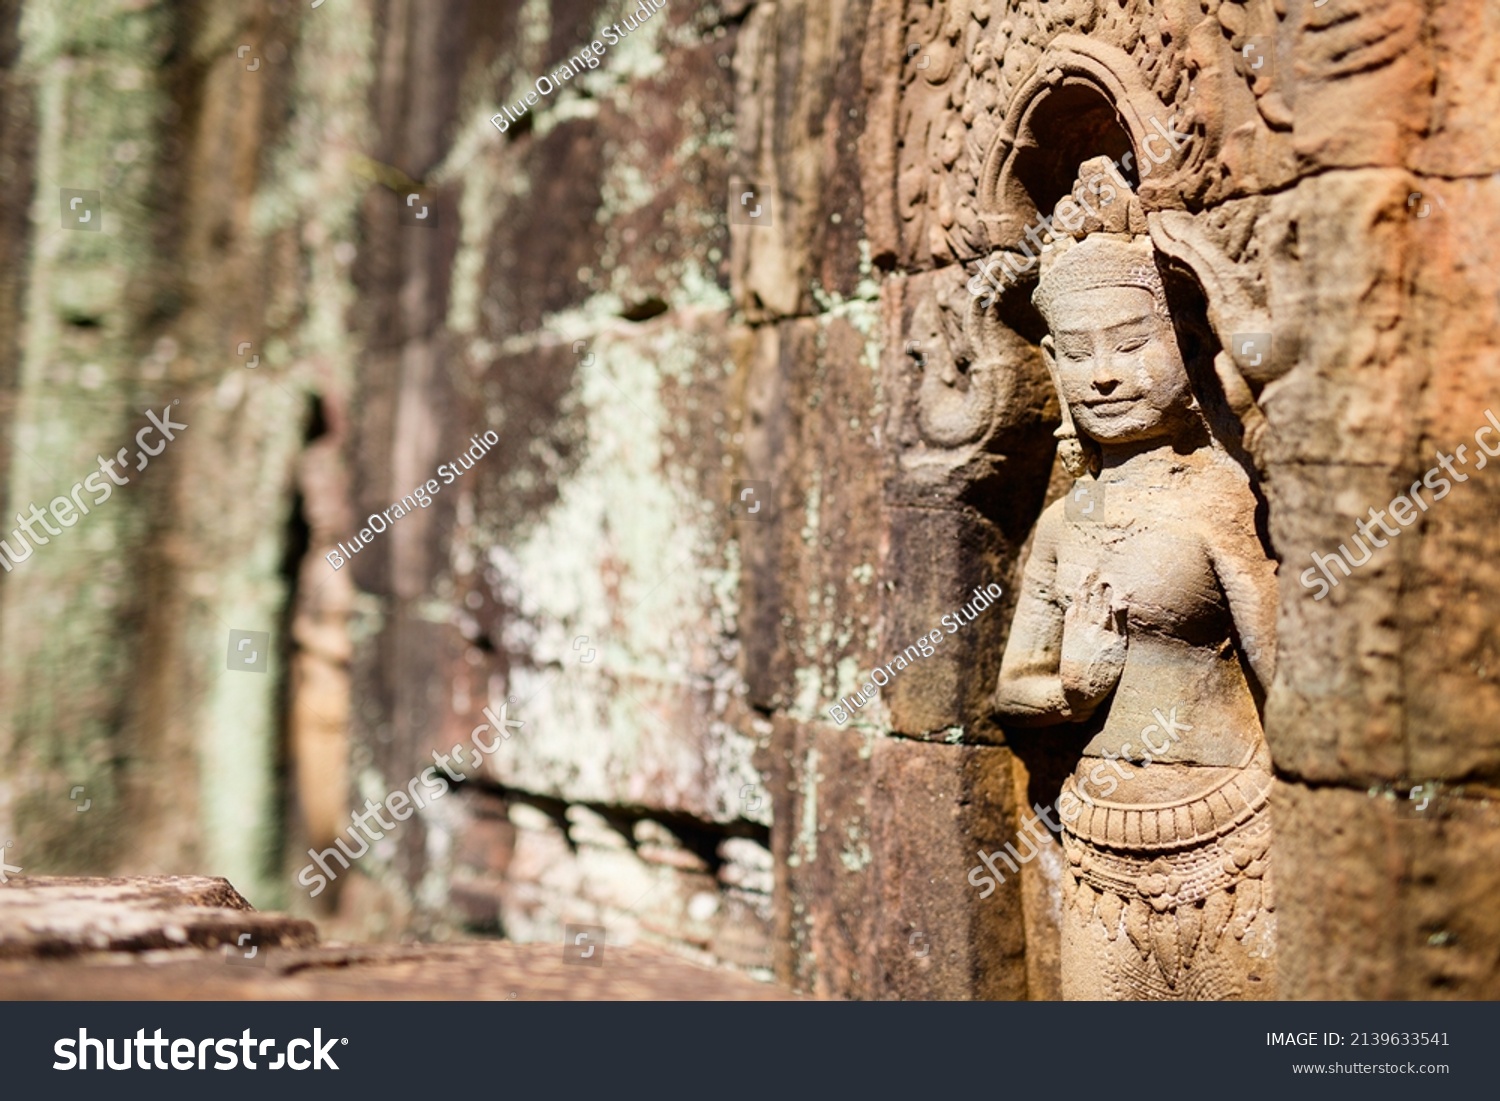 Bas reliefs in Angkor Archeological area in Cambodia #2139633541